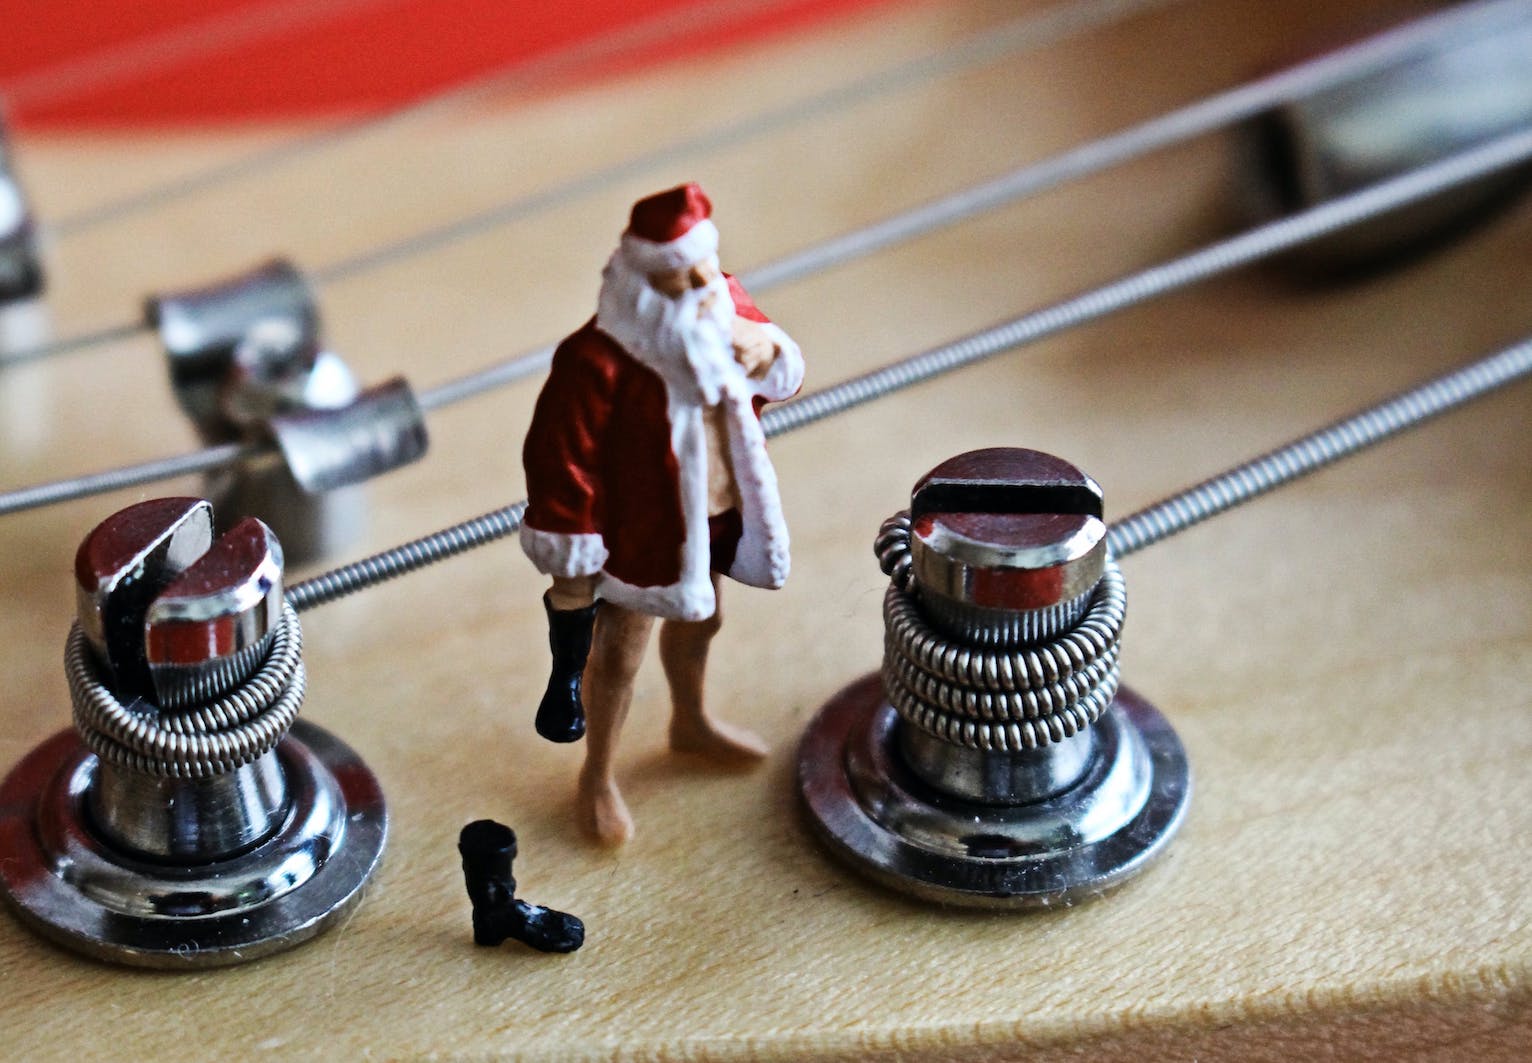 Santa standing on a Stratocaster Guitar